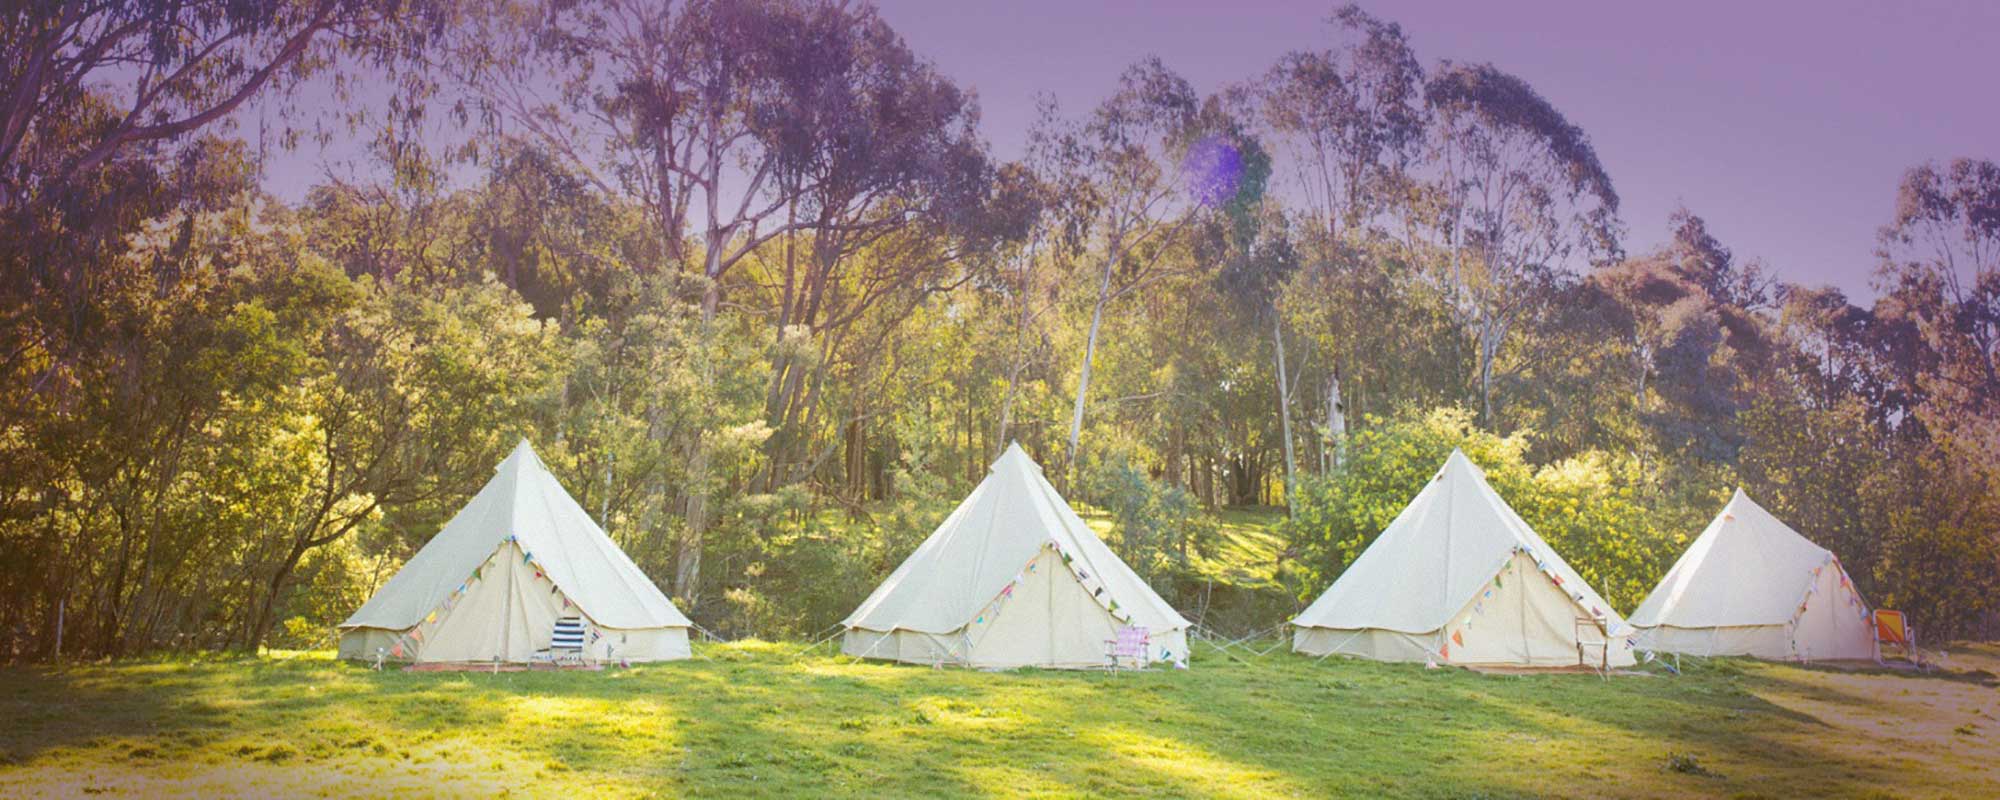 Now Offering New Events, Activities & Premium “Glamping”